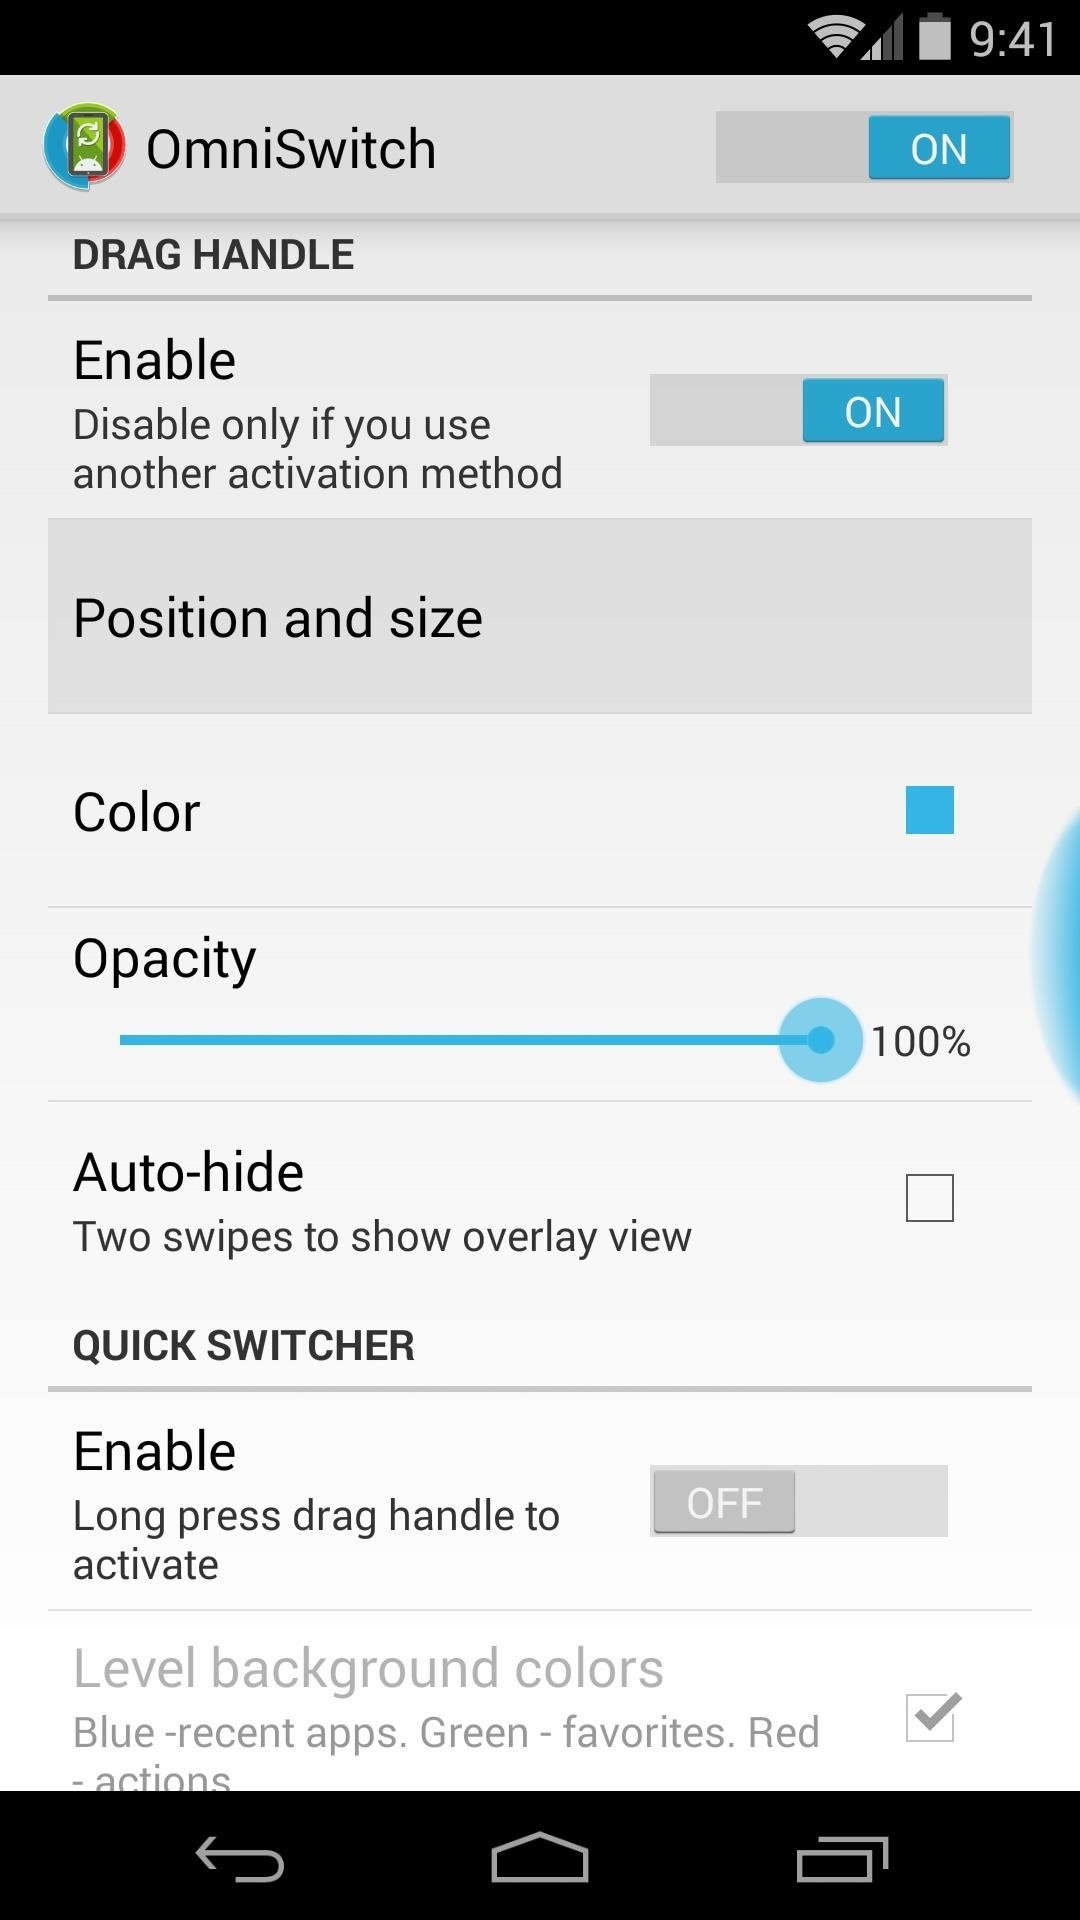 How to Install OmniSwitch for Streamlined Multitasking on Your Nexus 5